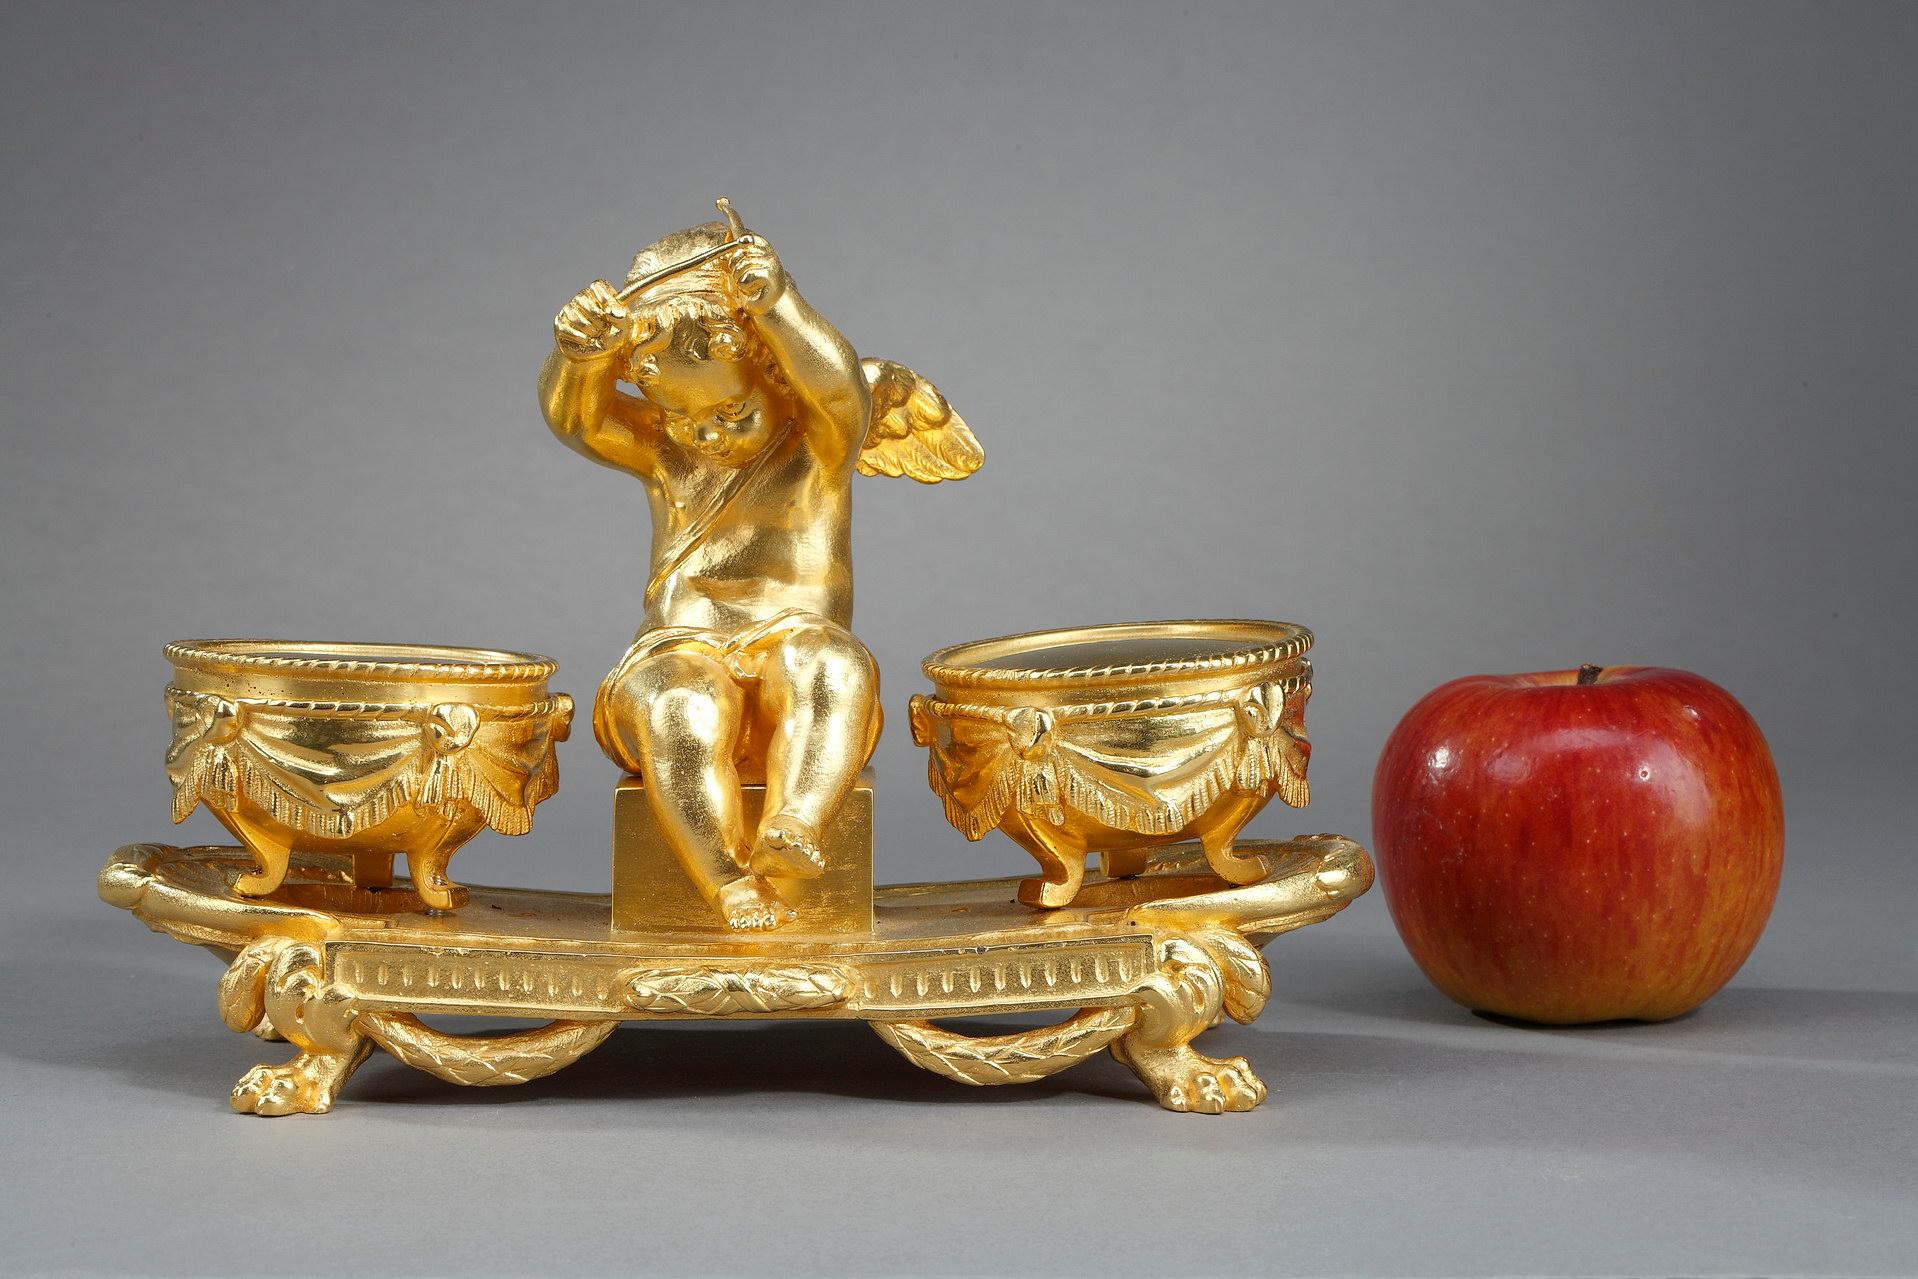 Gilt bronze inkwell in the Louis XVI style, representing Love seated with two sticks in his hands, surrounded by timbales. The circular timbales in gilt bronze, are decorated with drapery and rest on three feet. The whole is fixed on an oval base